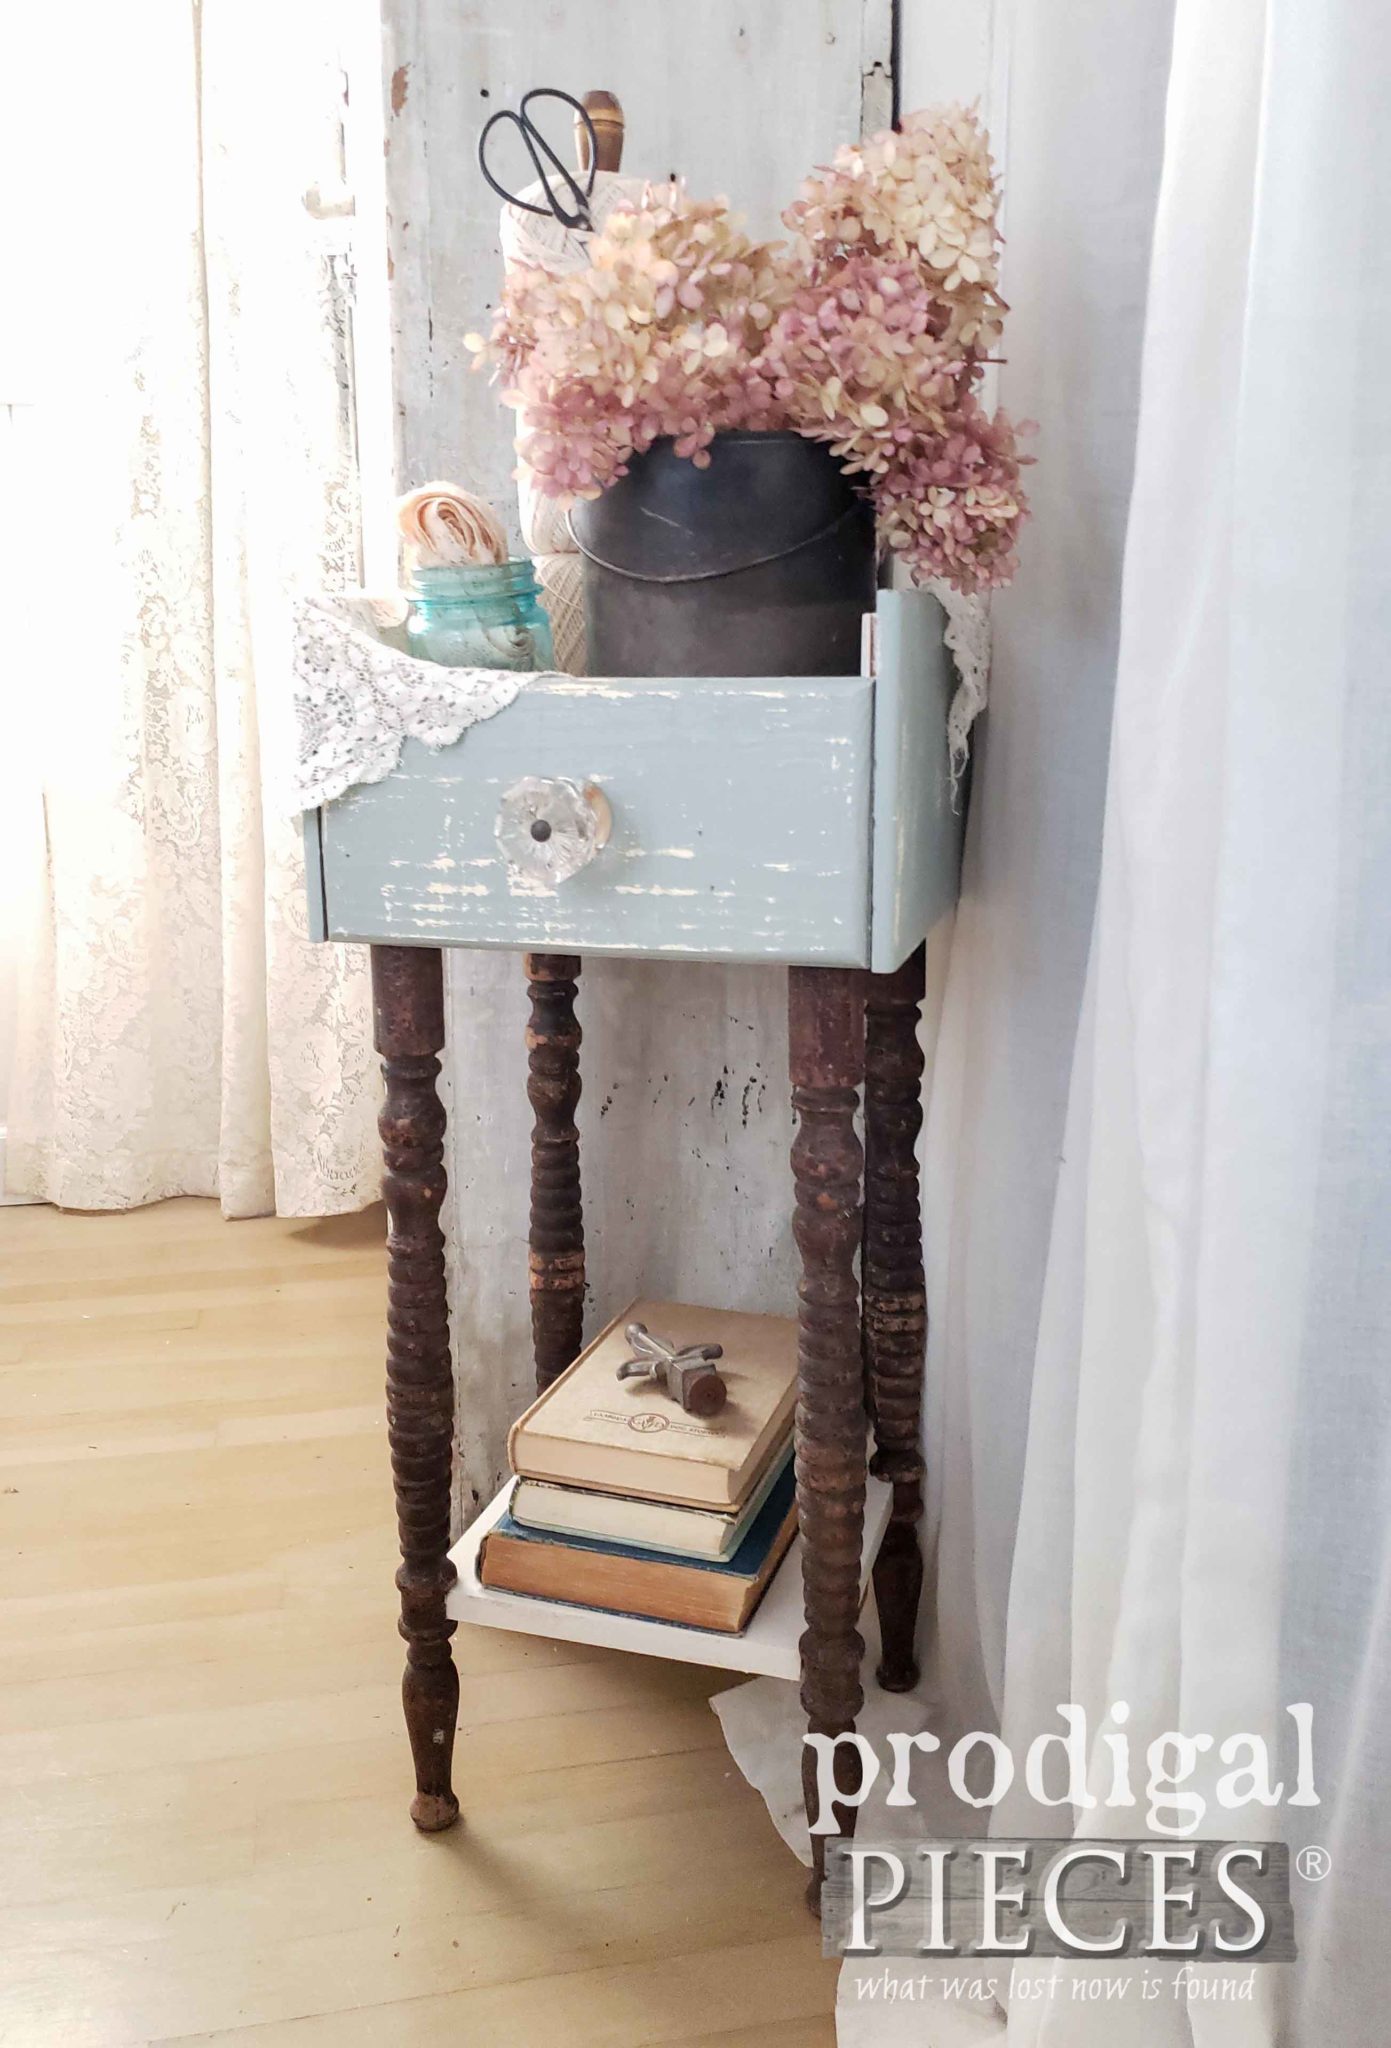 Repurposed Drawer Fronts Made into an Upcycled Plant Stand with Antique Table Legs by Larissa of Prodigal Pieces | prodigalpieces.com